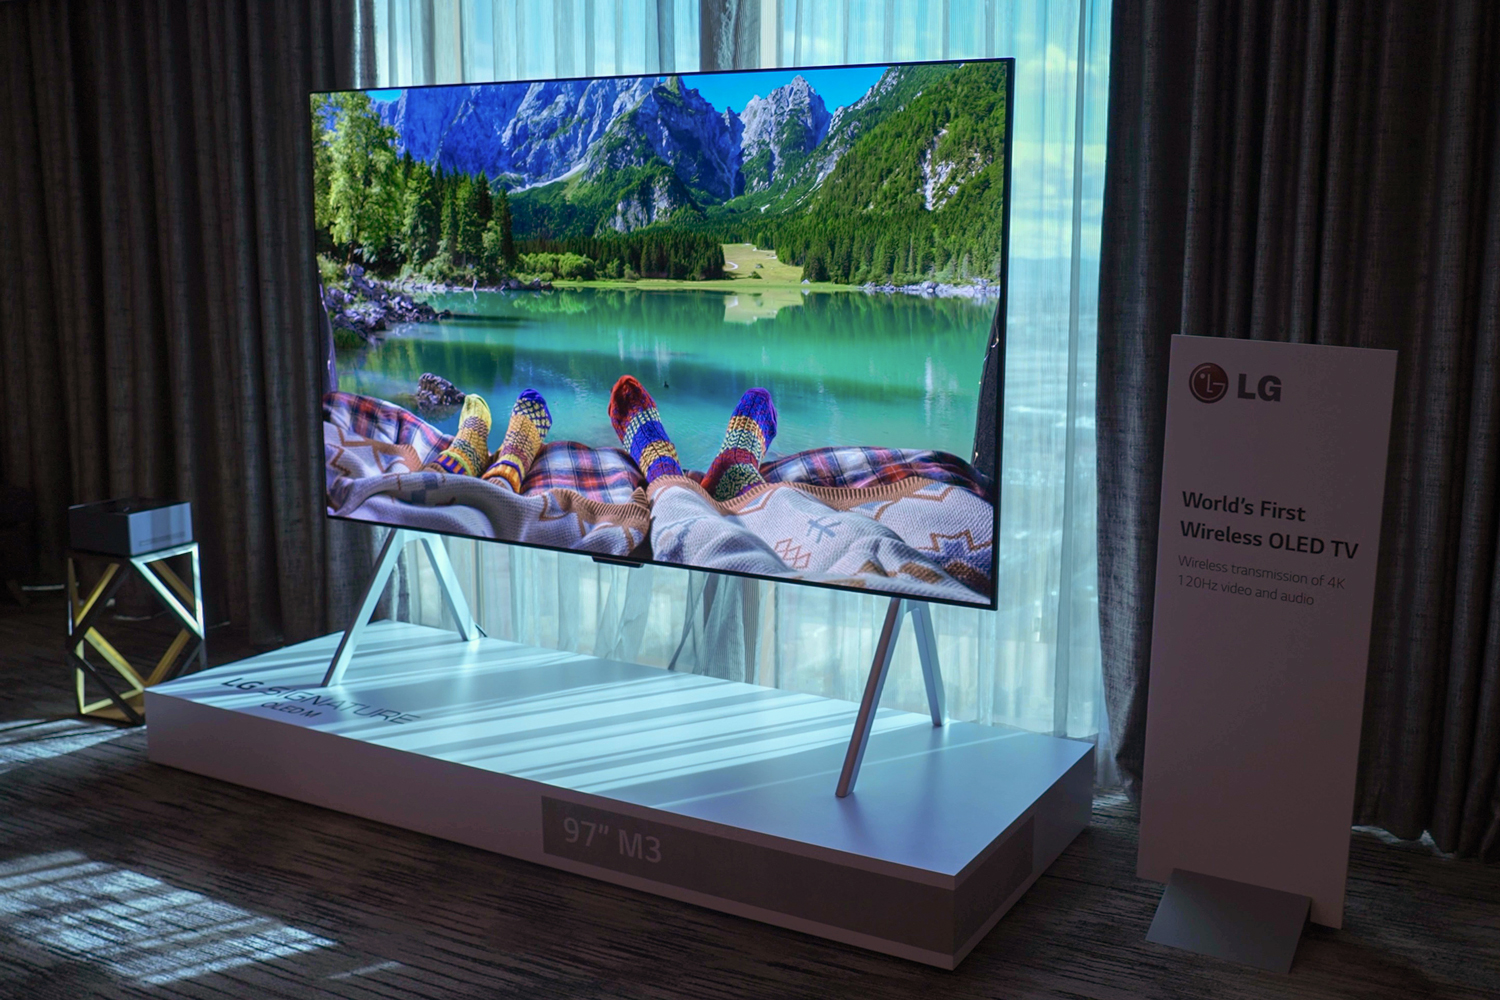 LG M3 OLED TV hands-on review: wireless 4K/120Hz becomes a reality